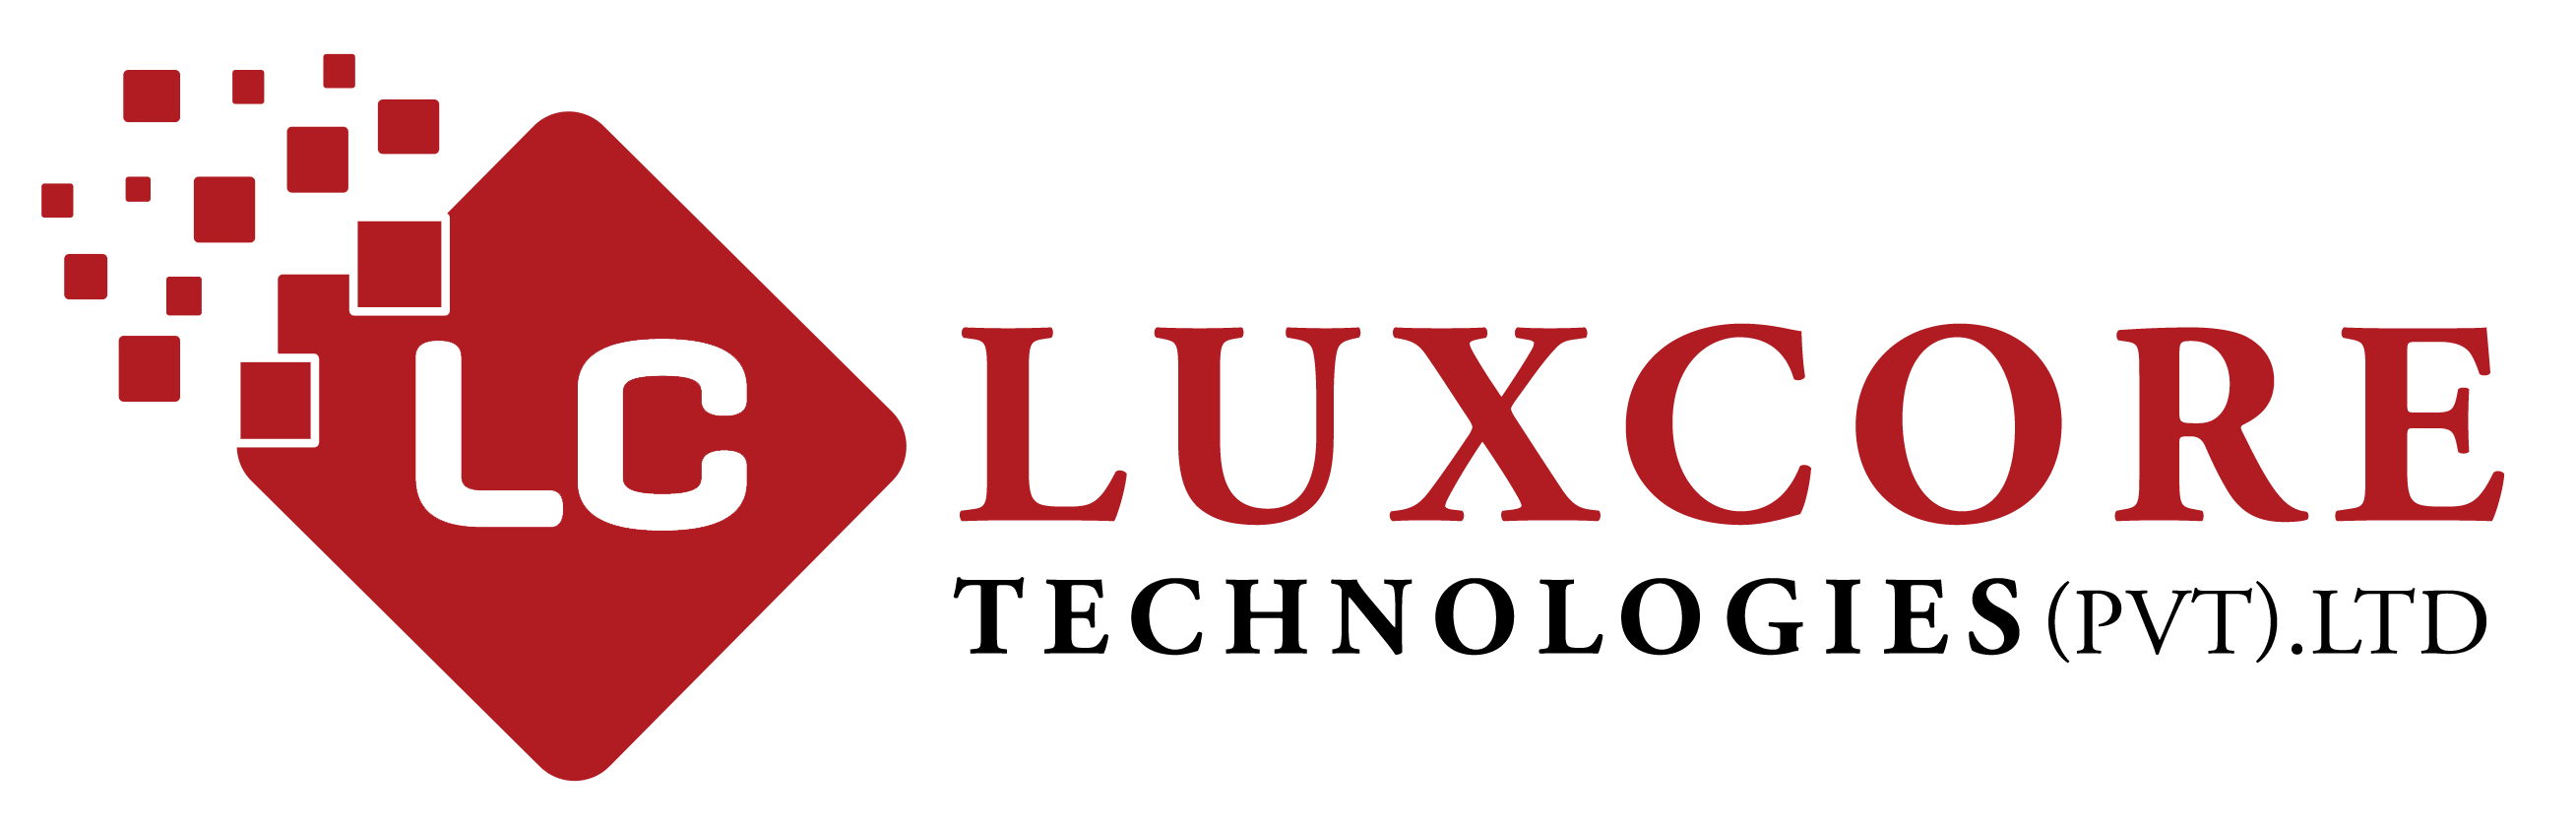 Luxcore Technologies 